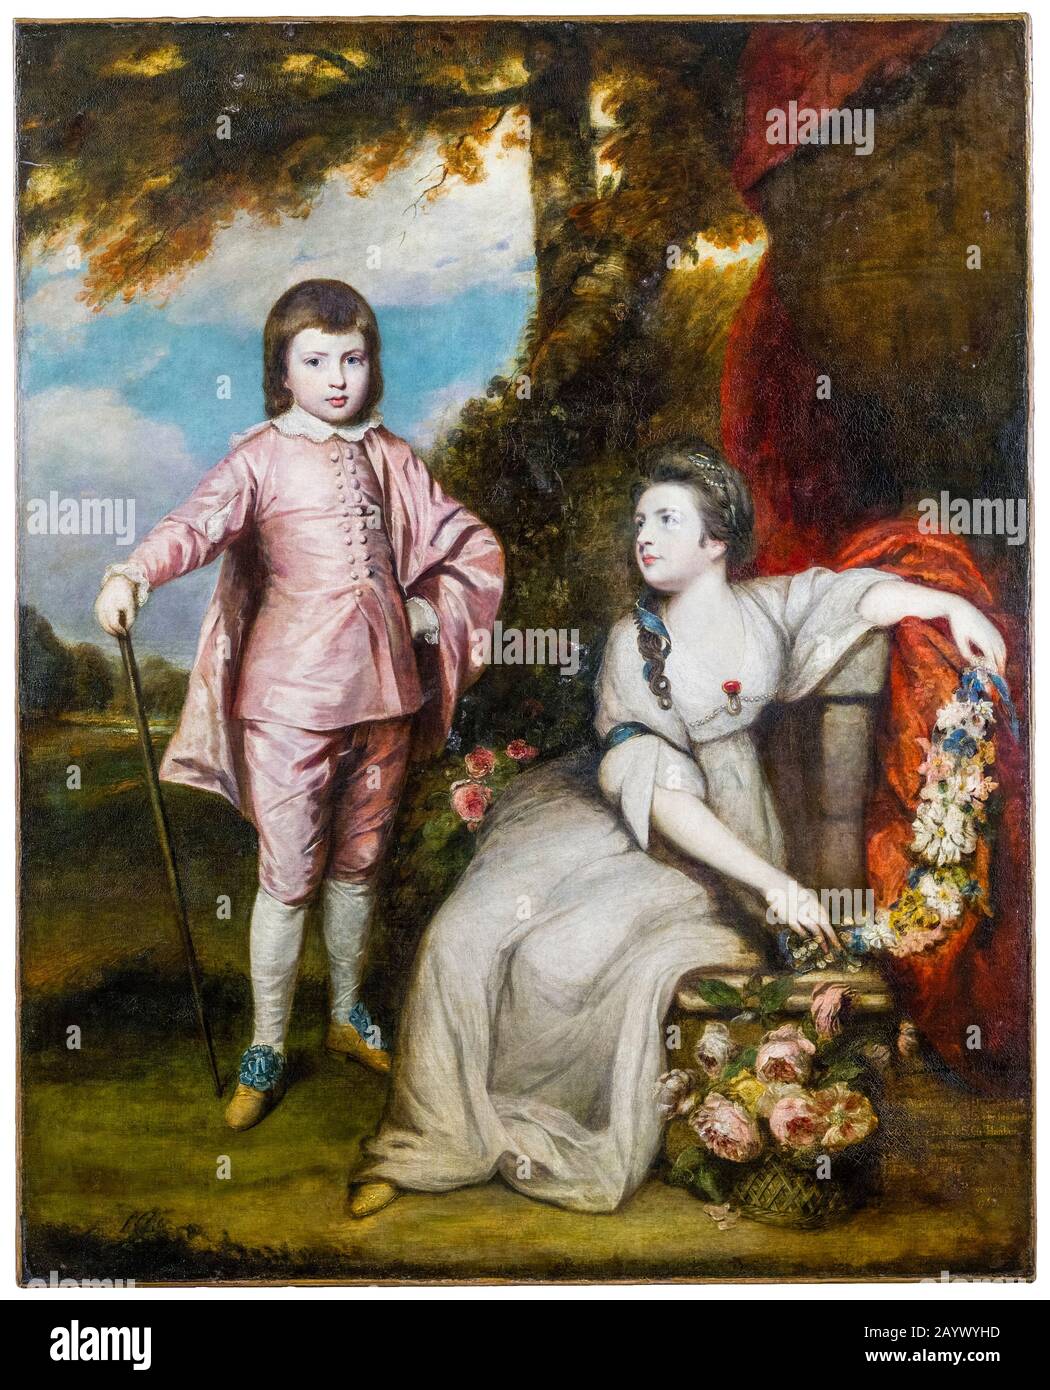 George Capel, Viscount Malden (1757–1839) and Lady Elizabeth Capel (1755–1834), portrait painting by Sir Joshua Reynolds, 1768 Stock Photo